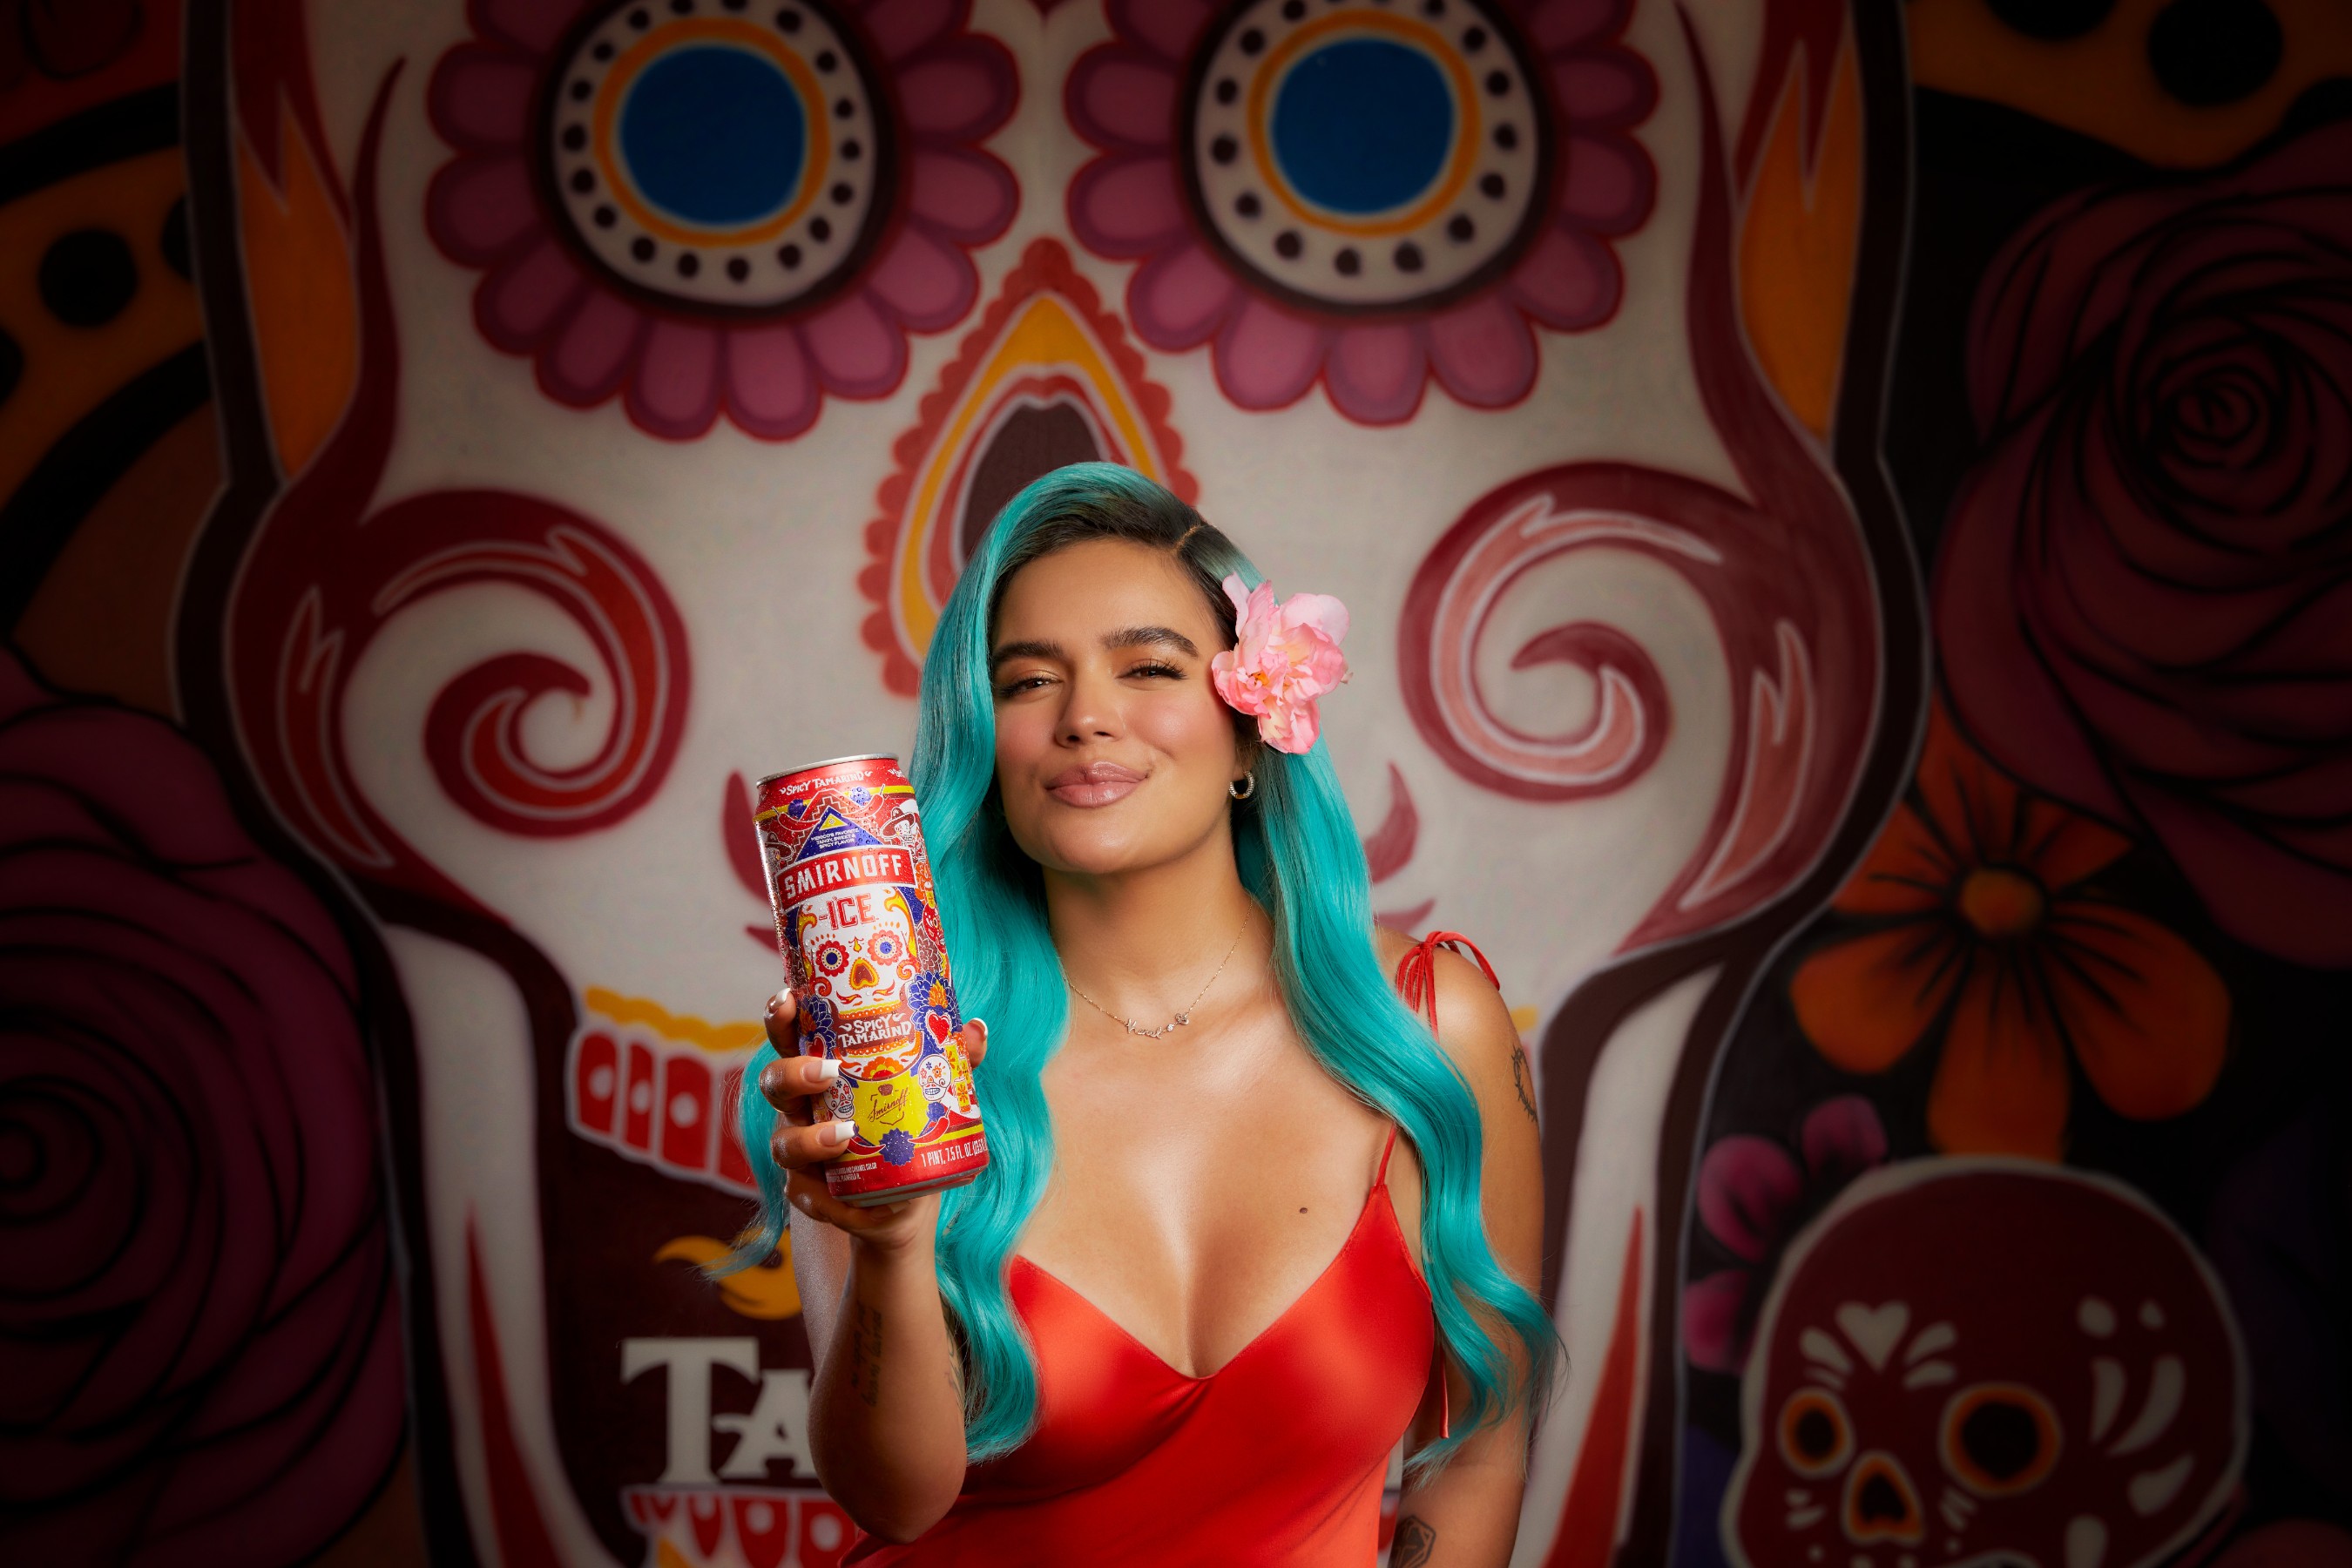 Smirnoff is announcing it is officially teaming up with Colombian singer, songwriter and business mogul Karol G to collaborate on new projects that showcase the power of Latin culture, as well as support the brand in its longstanding commitment to diversity and inclusion efforts.